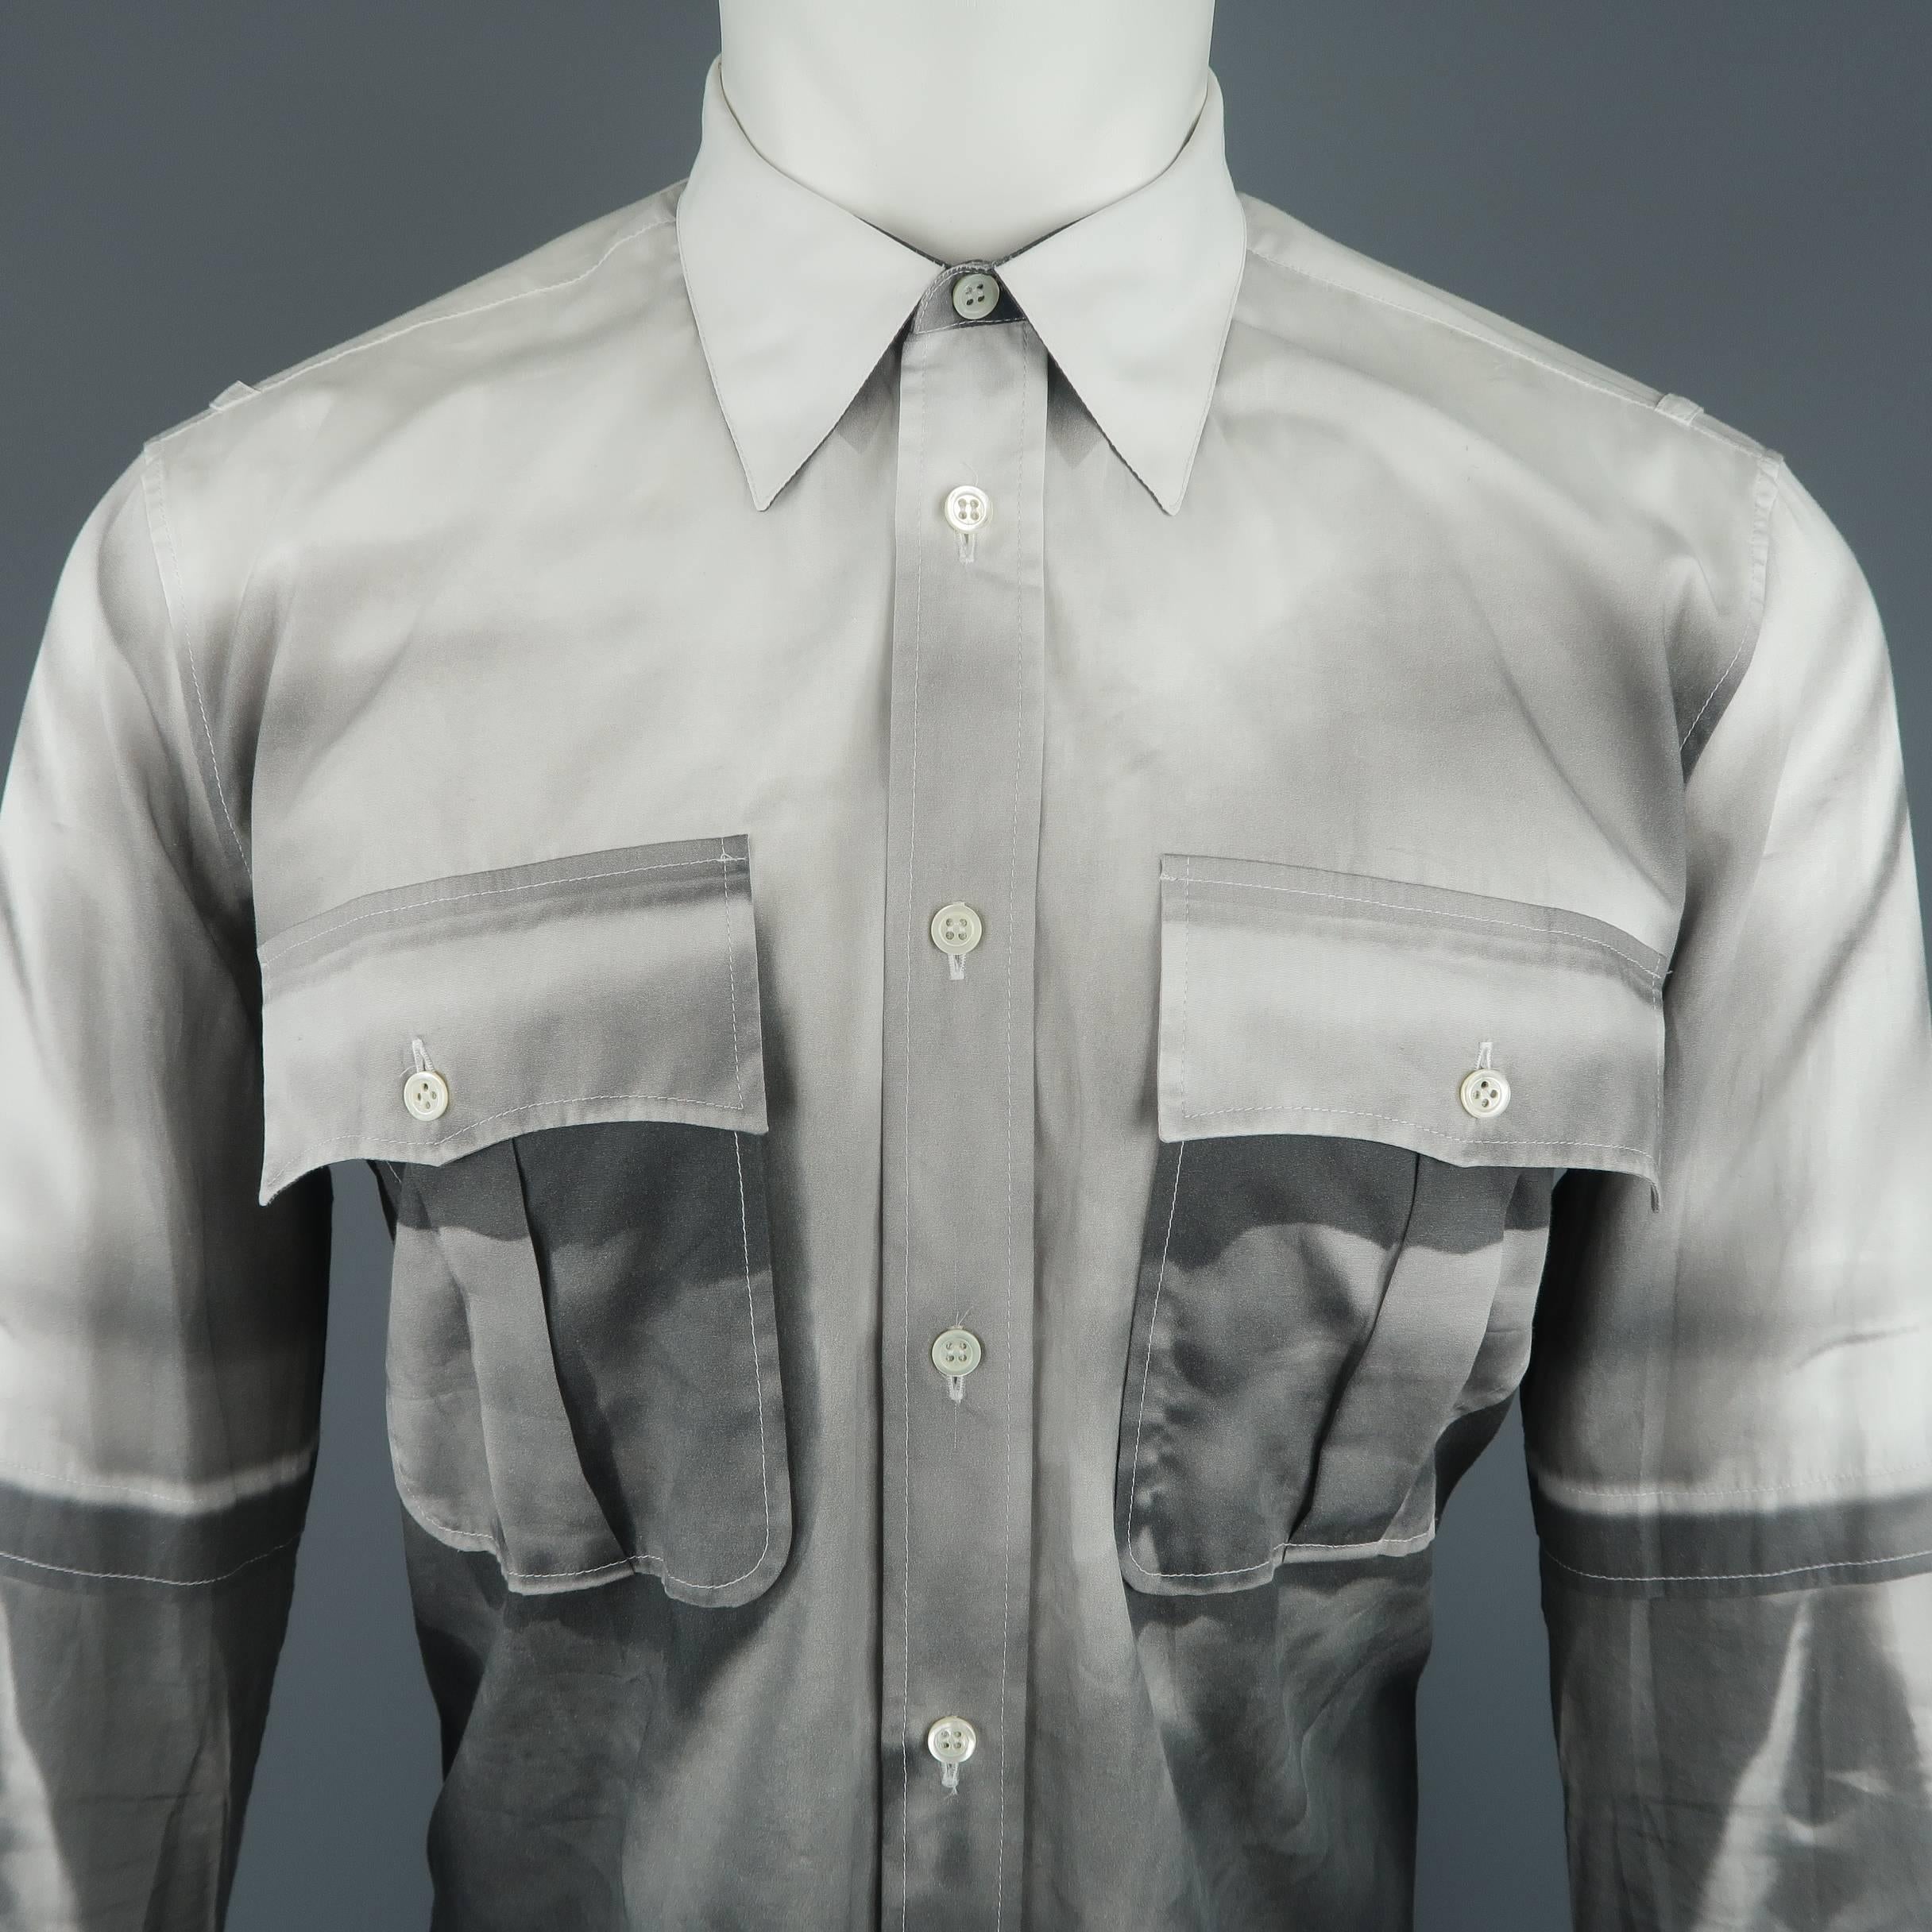 Alexander McQueen shirt comes in white cotton with patch flap pockets, shoulder straps, and all over photo print. Made in Italy.
 
Excellent Pre-Owned Condition.
Marked: IT 46
 
Measurements:
 
Shoulder: 17 in.
Chest: 50 in.
Sleeve: 26 in.
Length: